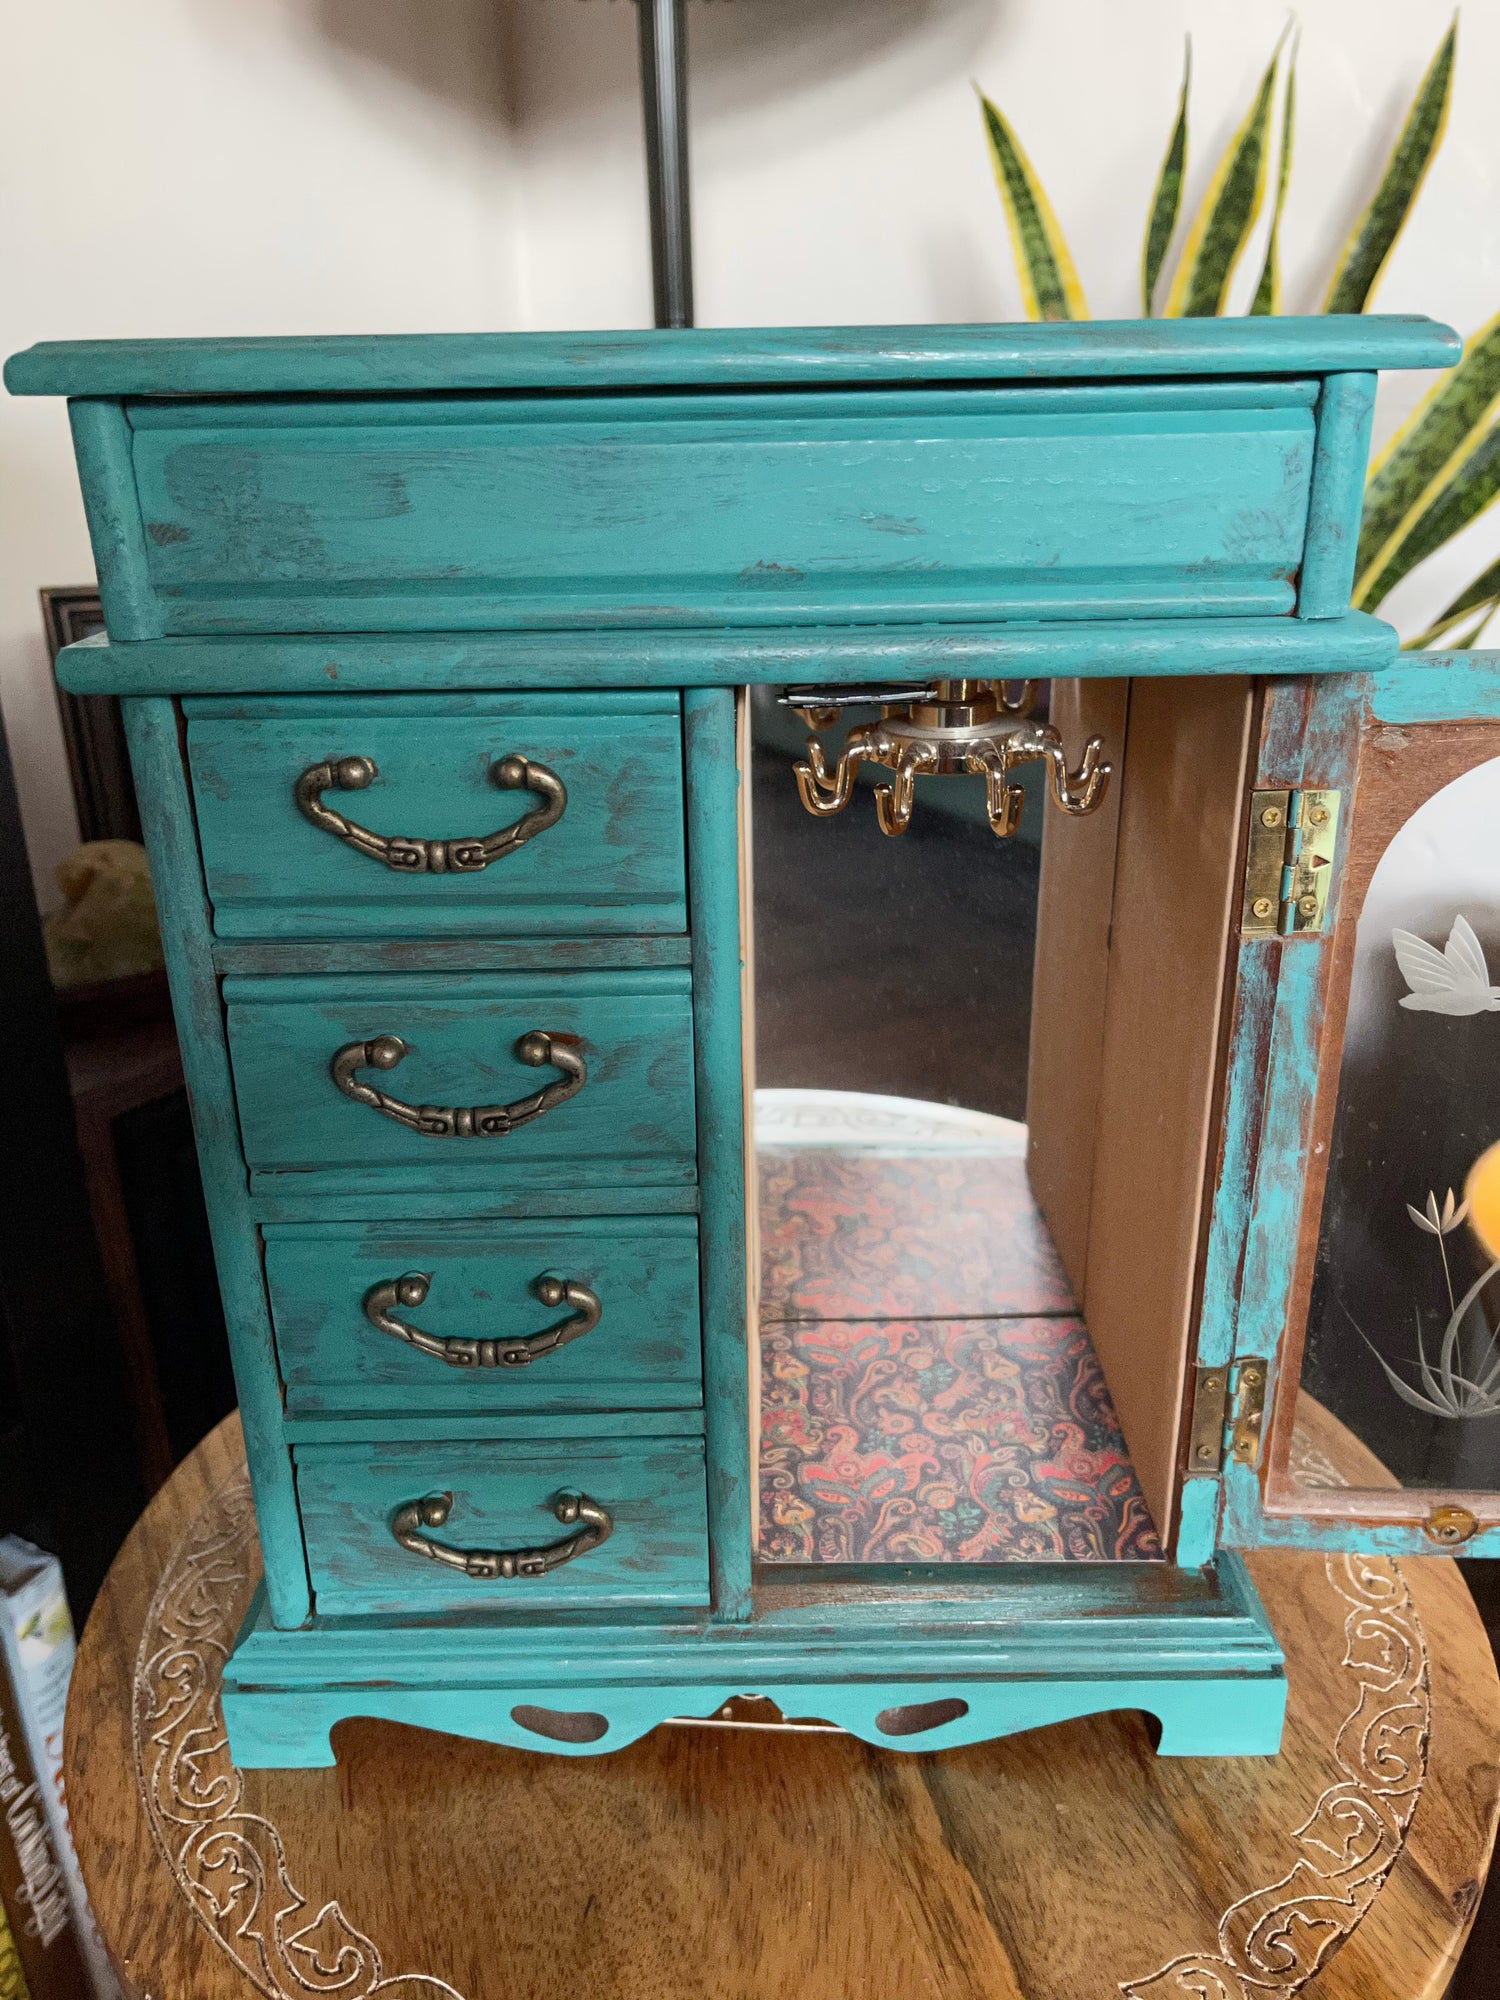 Vintage Jewelry Cabinet Redo with Paint and Mod Podge - Garden Sanity by  Pet Scribbles